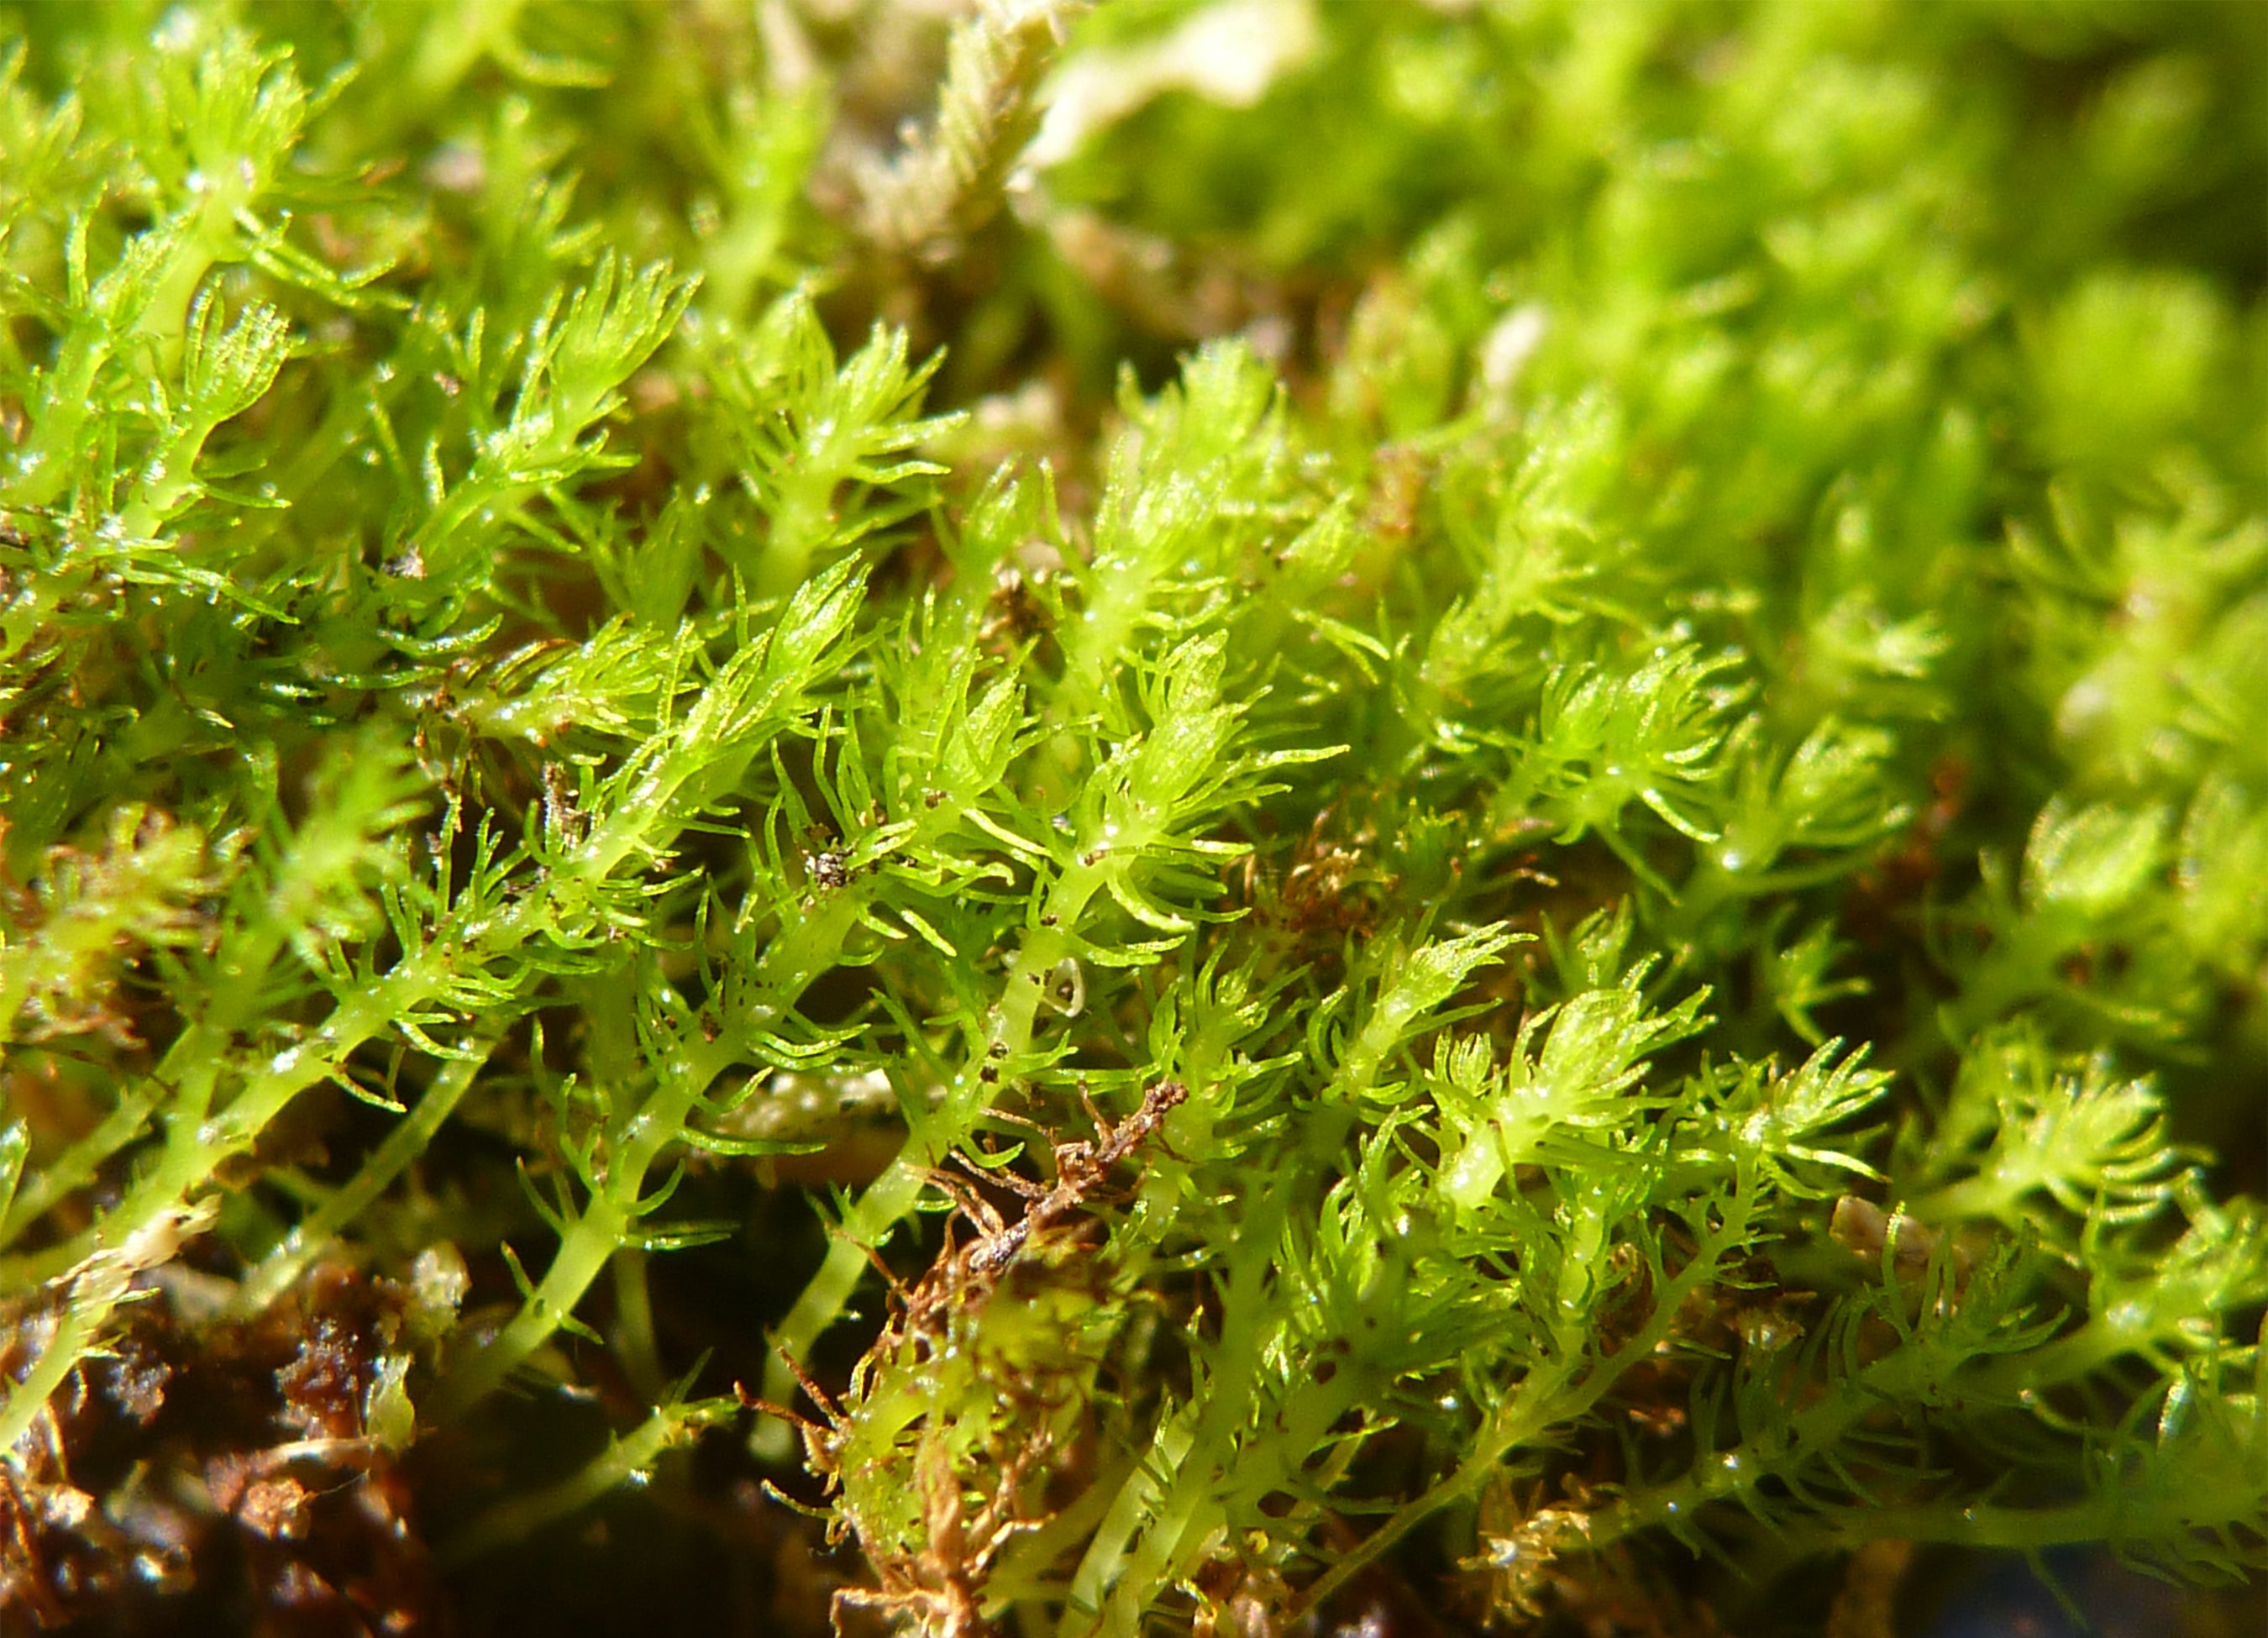 Mosses are the lifeblood of plant ecosystems, say researchers